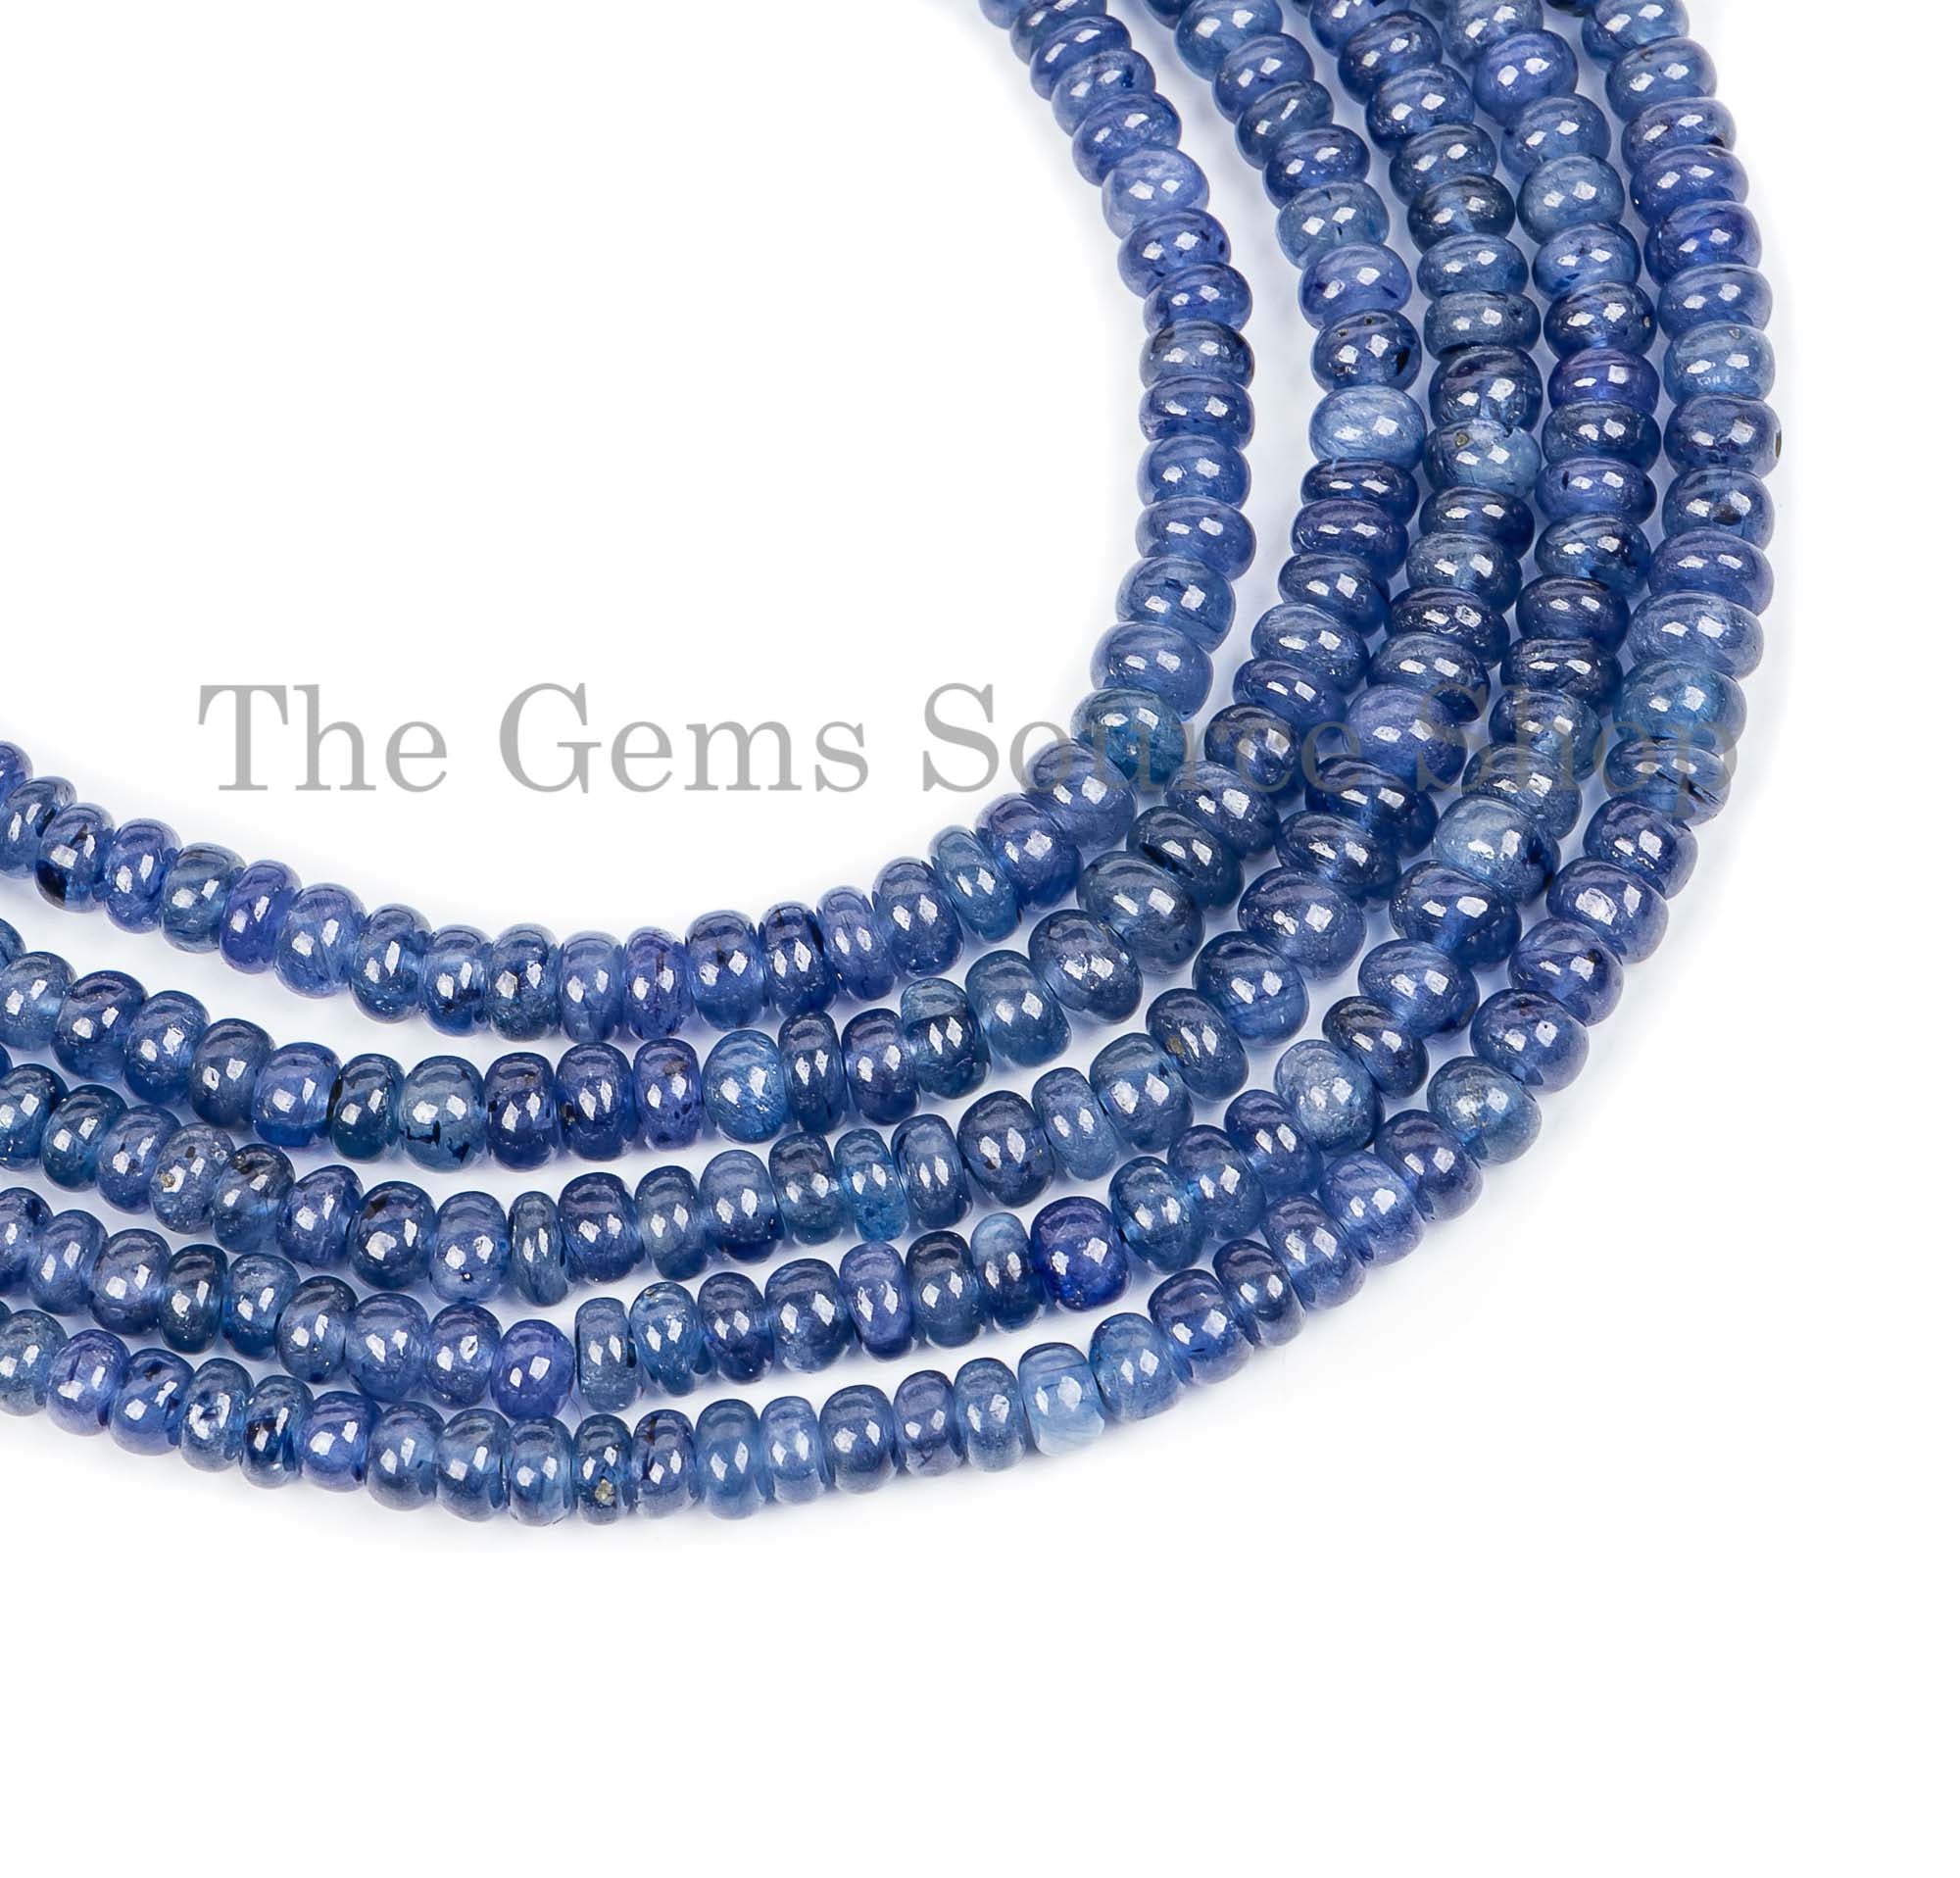 Natural Blue Sapphire Beads, Sapphire Smooth Rondelle Beads, Plain Blue Sapphire Beads